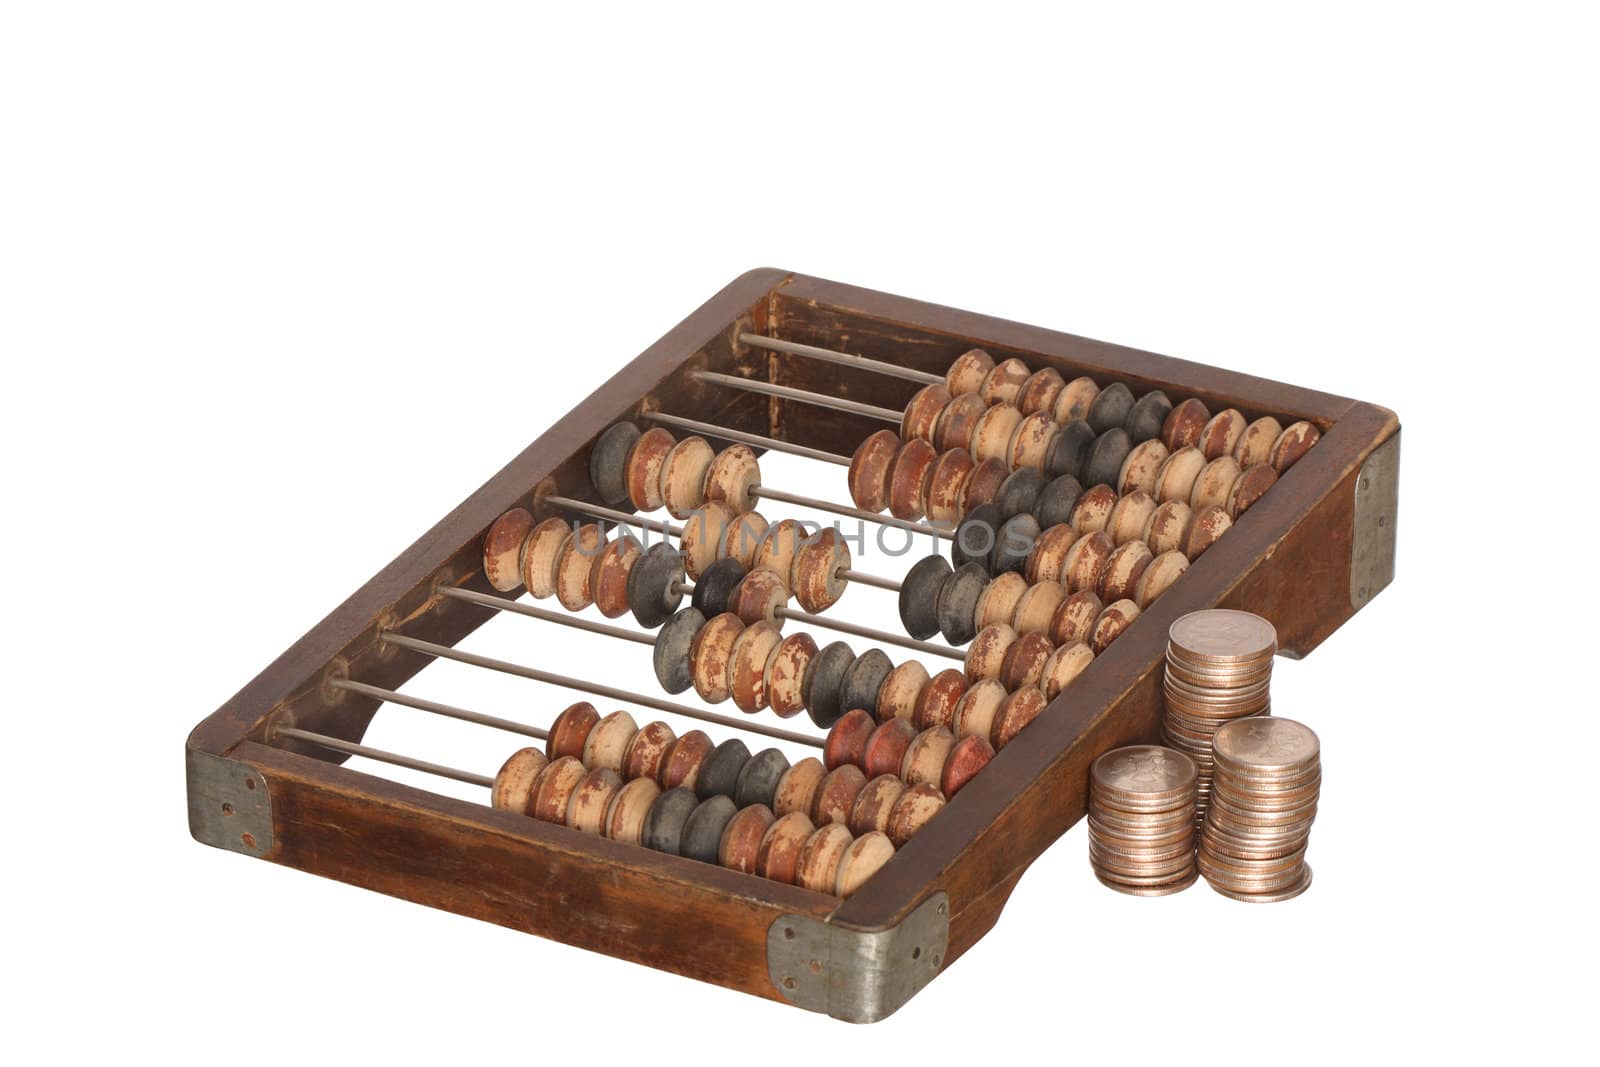 Old wooden abacus and coins isolated on white background with clipping path